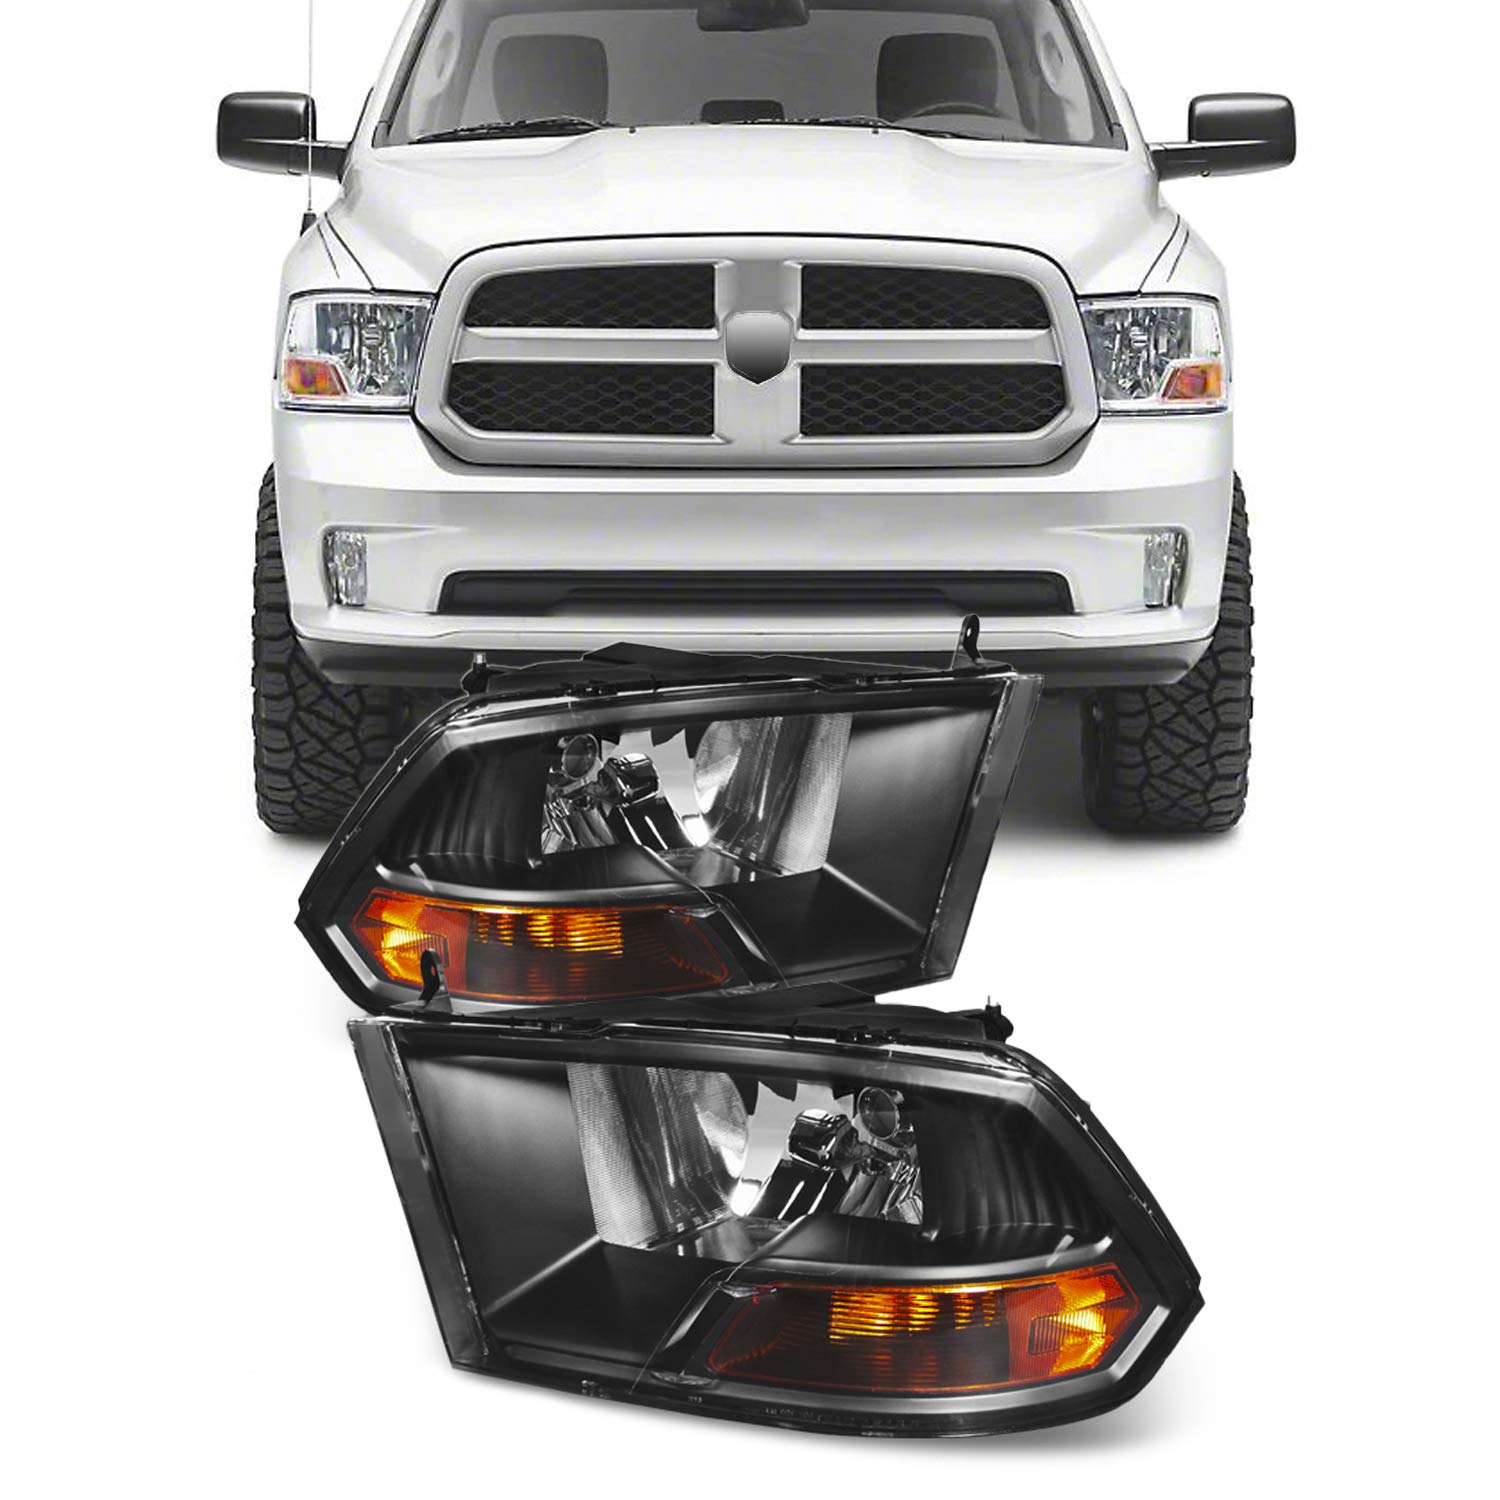 AKKON - For Black 09-18 Ram 1500 2010-2018 Ram 2500 3500 Pickup Truck  Headlights Front Lamps Direct Replacement